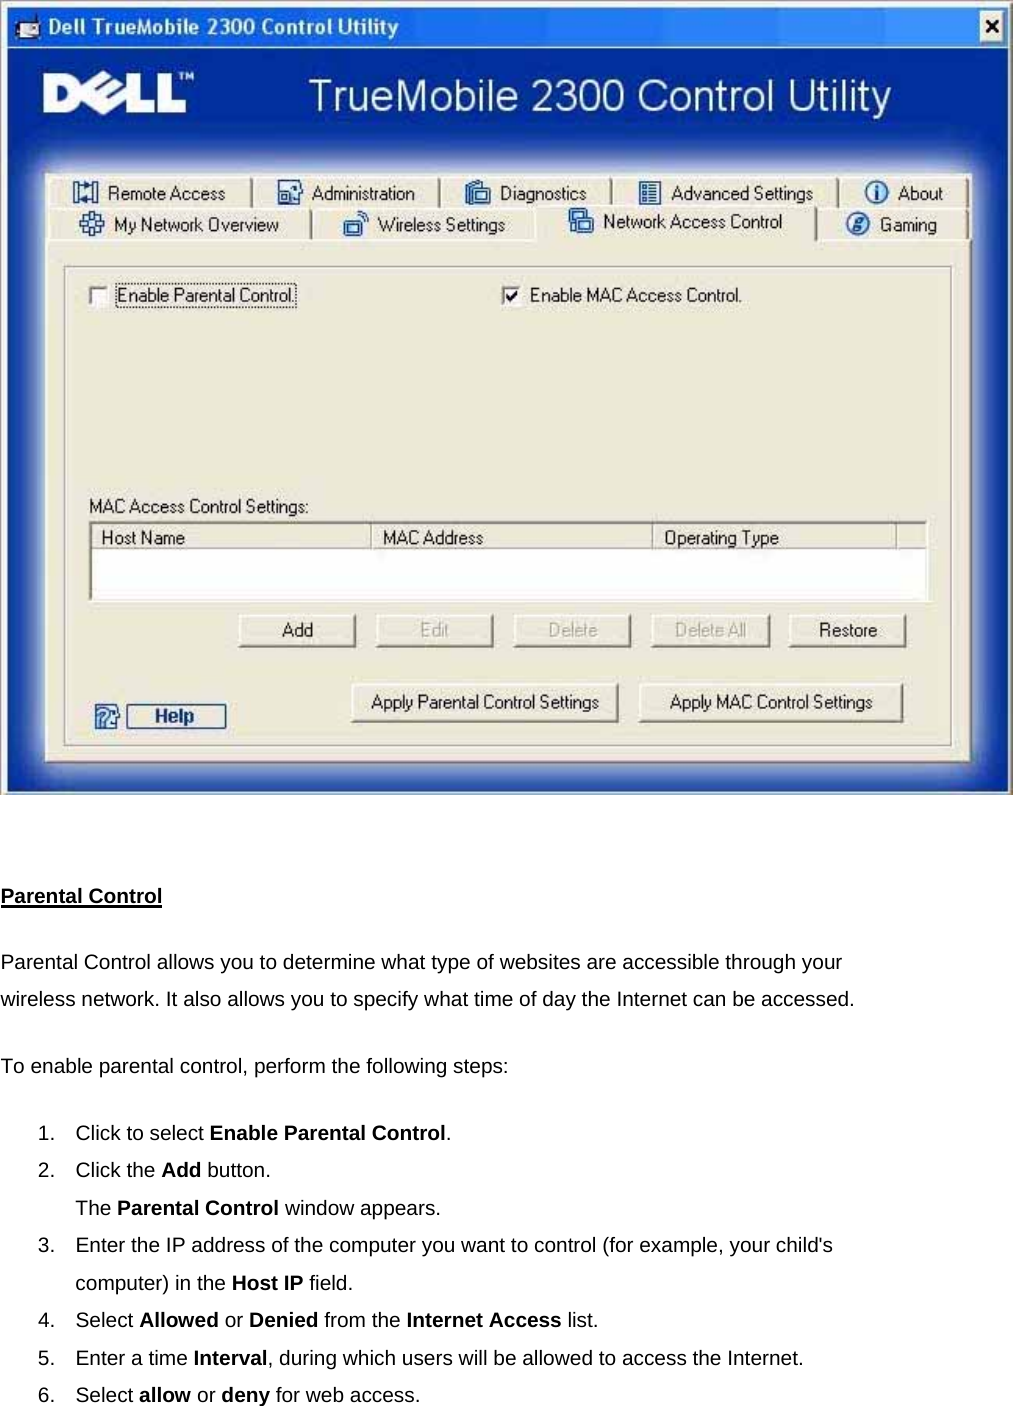    Parental ControlParental Control allows you to determine what type of websites are accessible through your wireless network. It also allows you to specify what time of day the Internet can be accessed. To enable parental control, perform the following steps: 1.  Click to select Enable Parental Control. 2. Click the Add button. The Parental Control window appears. 3.  Enter the IP address of the computer you want to control (for example, your child&apos;s computer) in the Host IP field. 4. Select Allowed or Denied from the Internet Access list. 5.  Enter a time Interval, during which users will be allowed to access the Internet.   6. Select allow or deny for web access. 